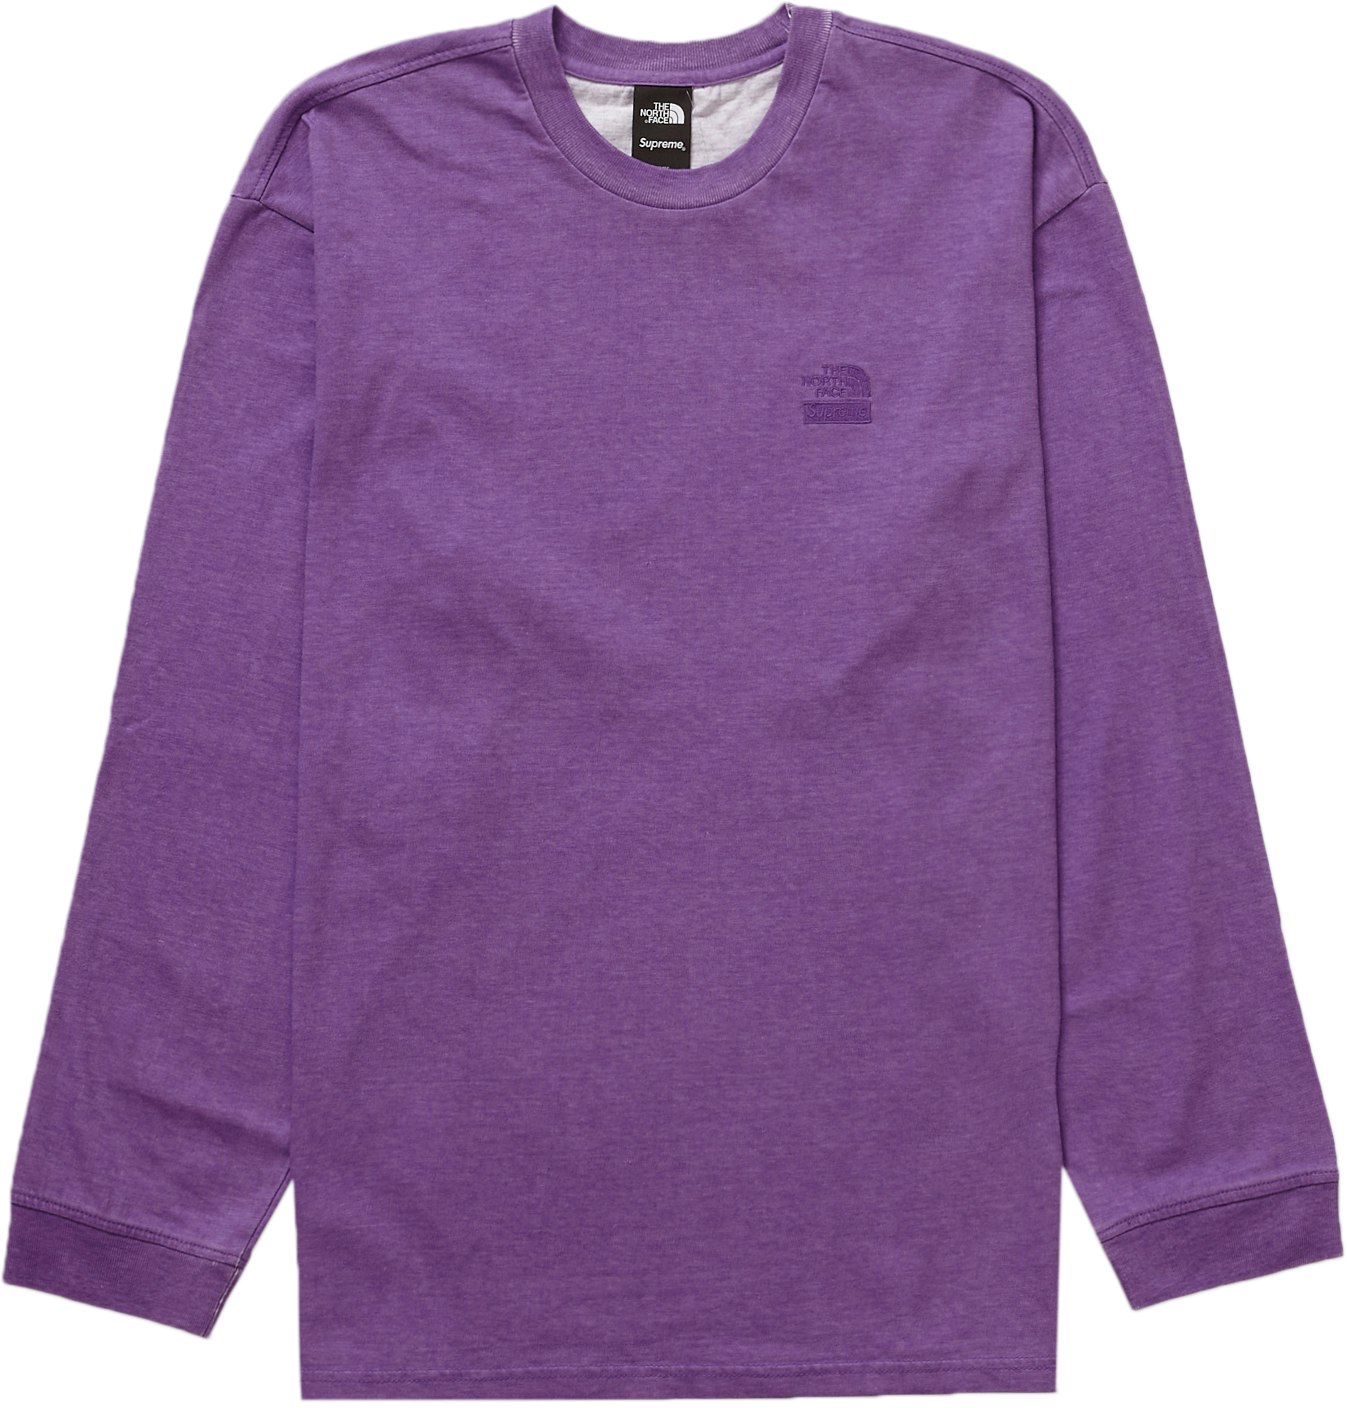 Supreme The North Face Pigment Printed L/S Top Purple - Novelship